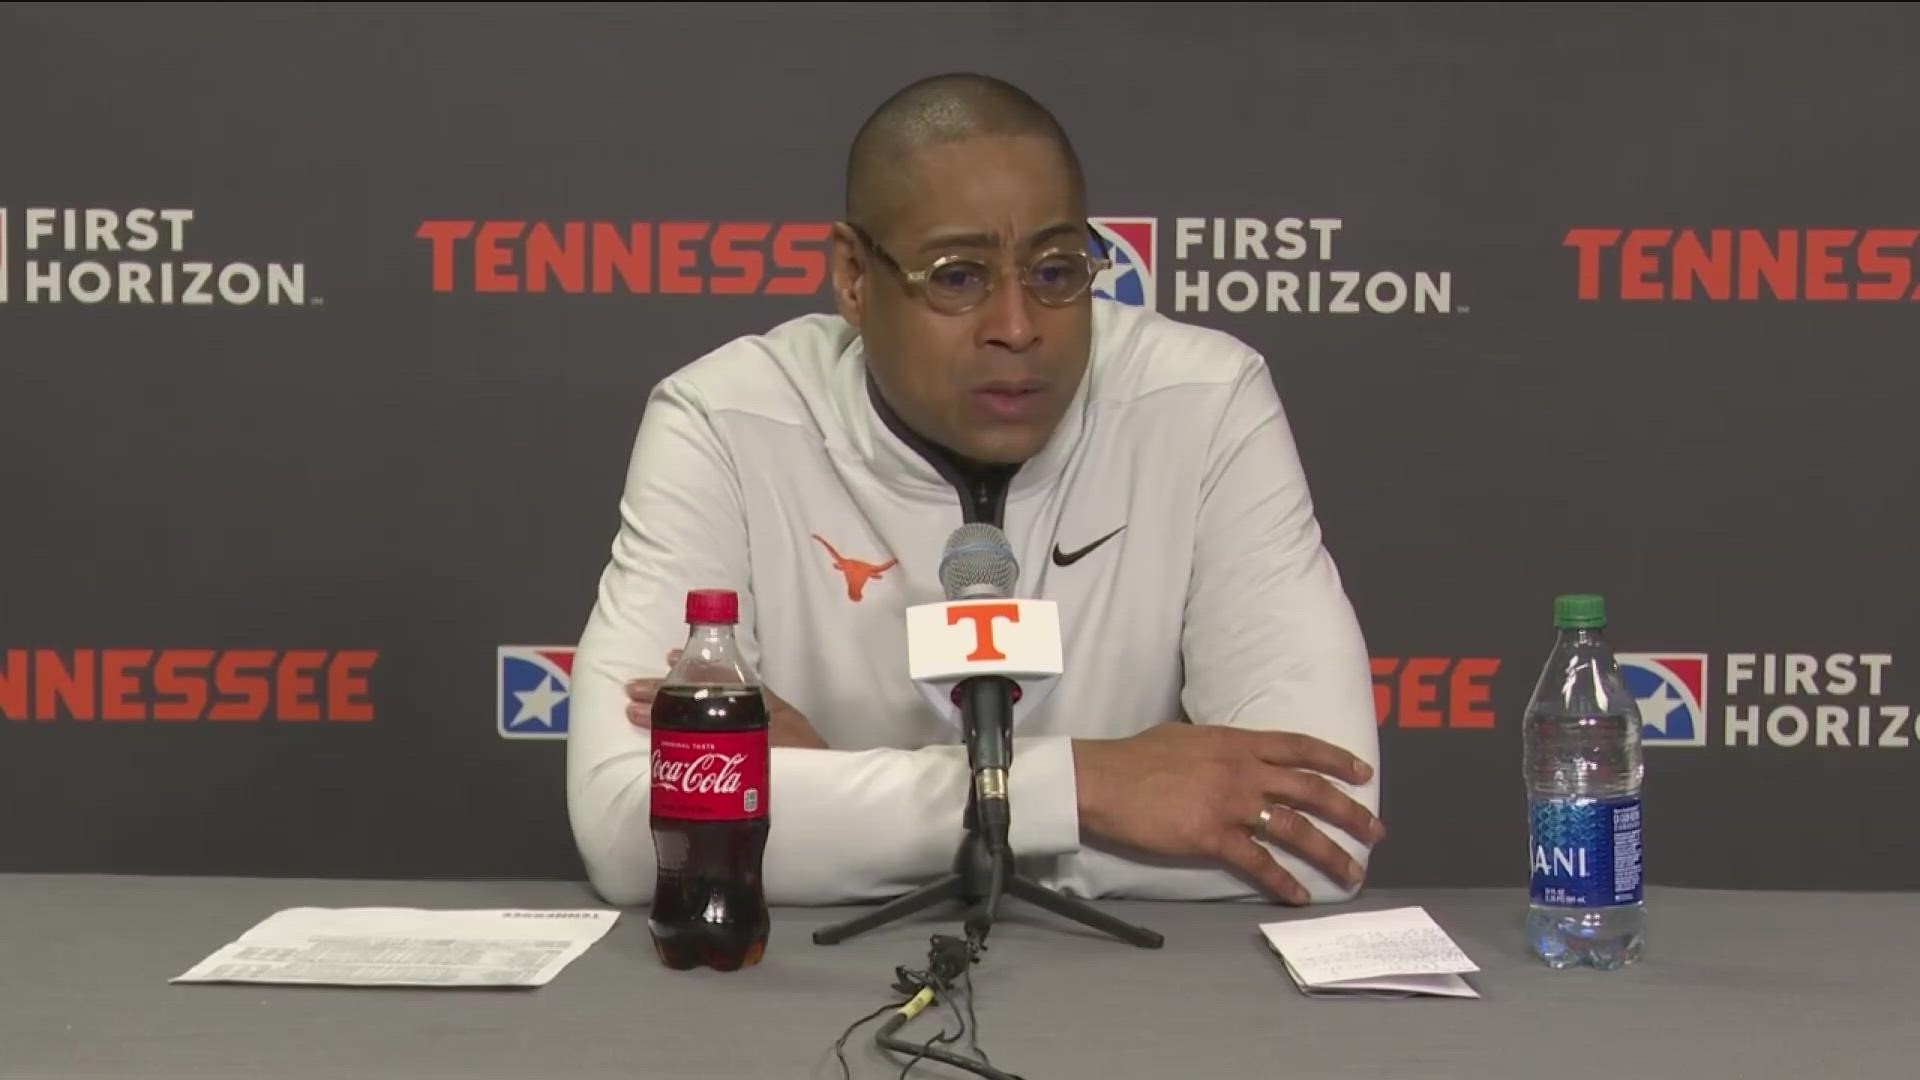 Tenth-ranked Texas got exposed by No. 4 Tennessee Saturday in Knoxville.